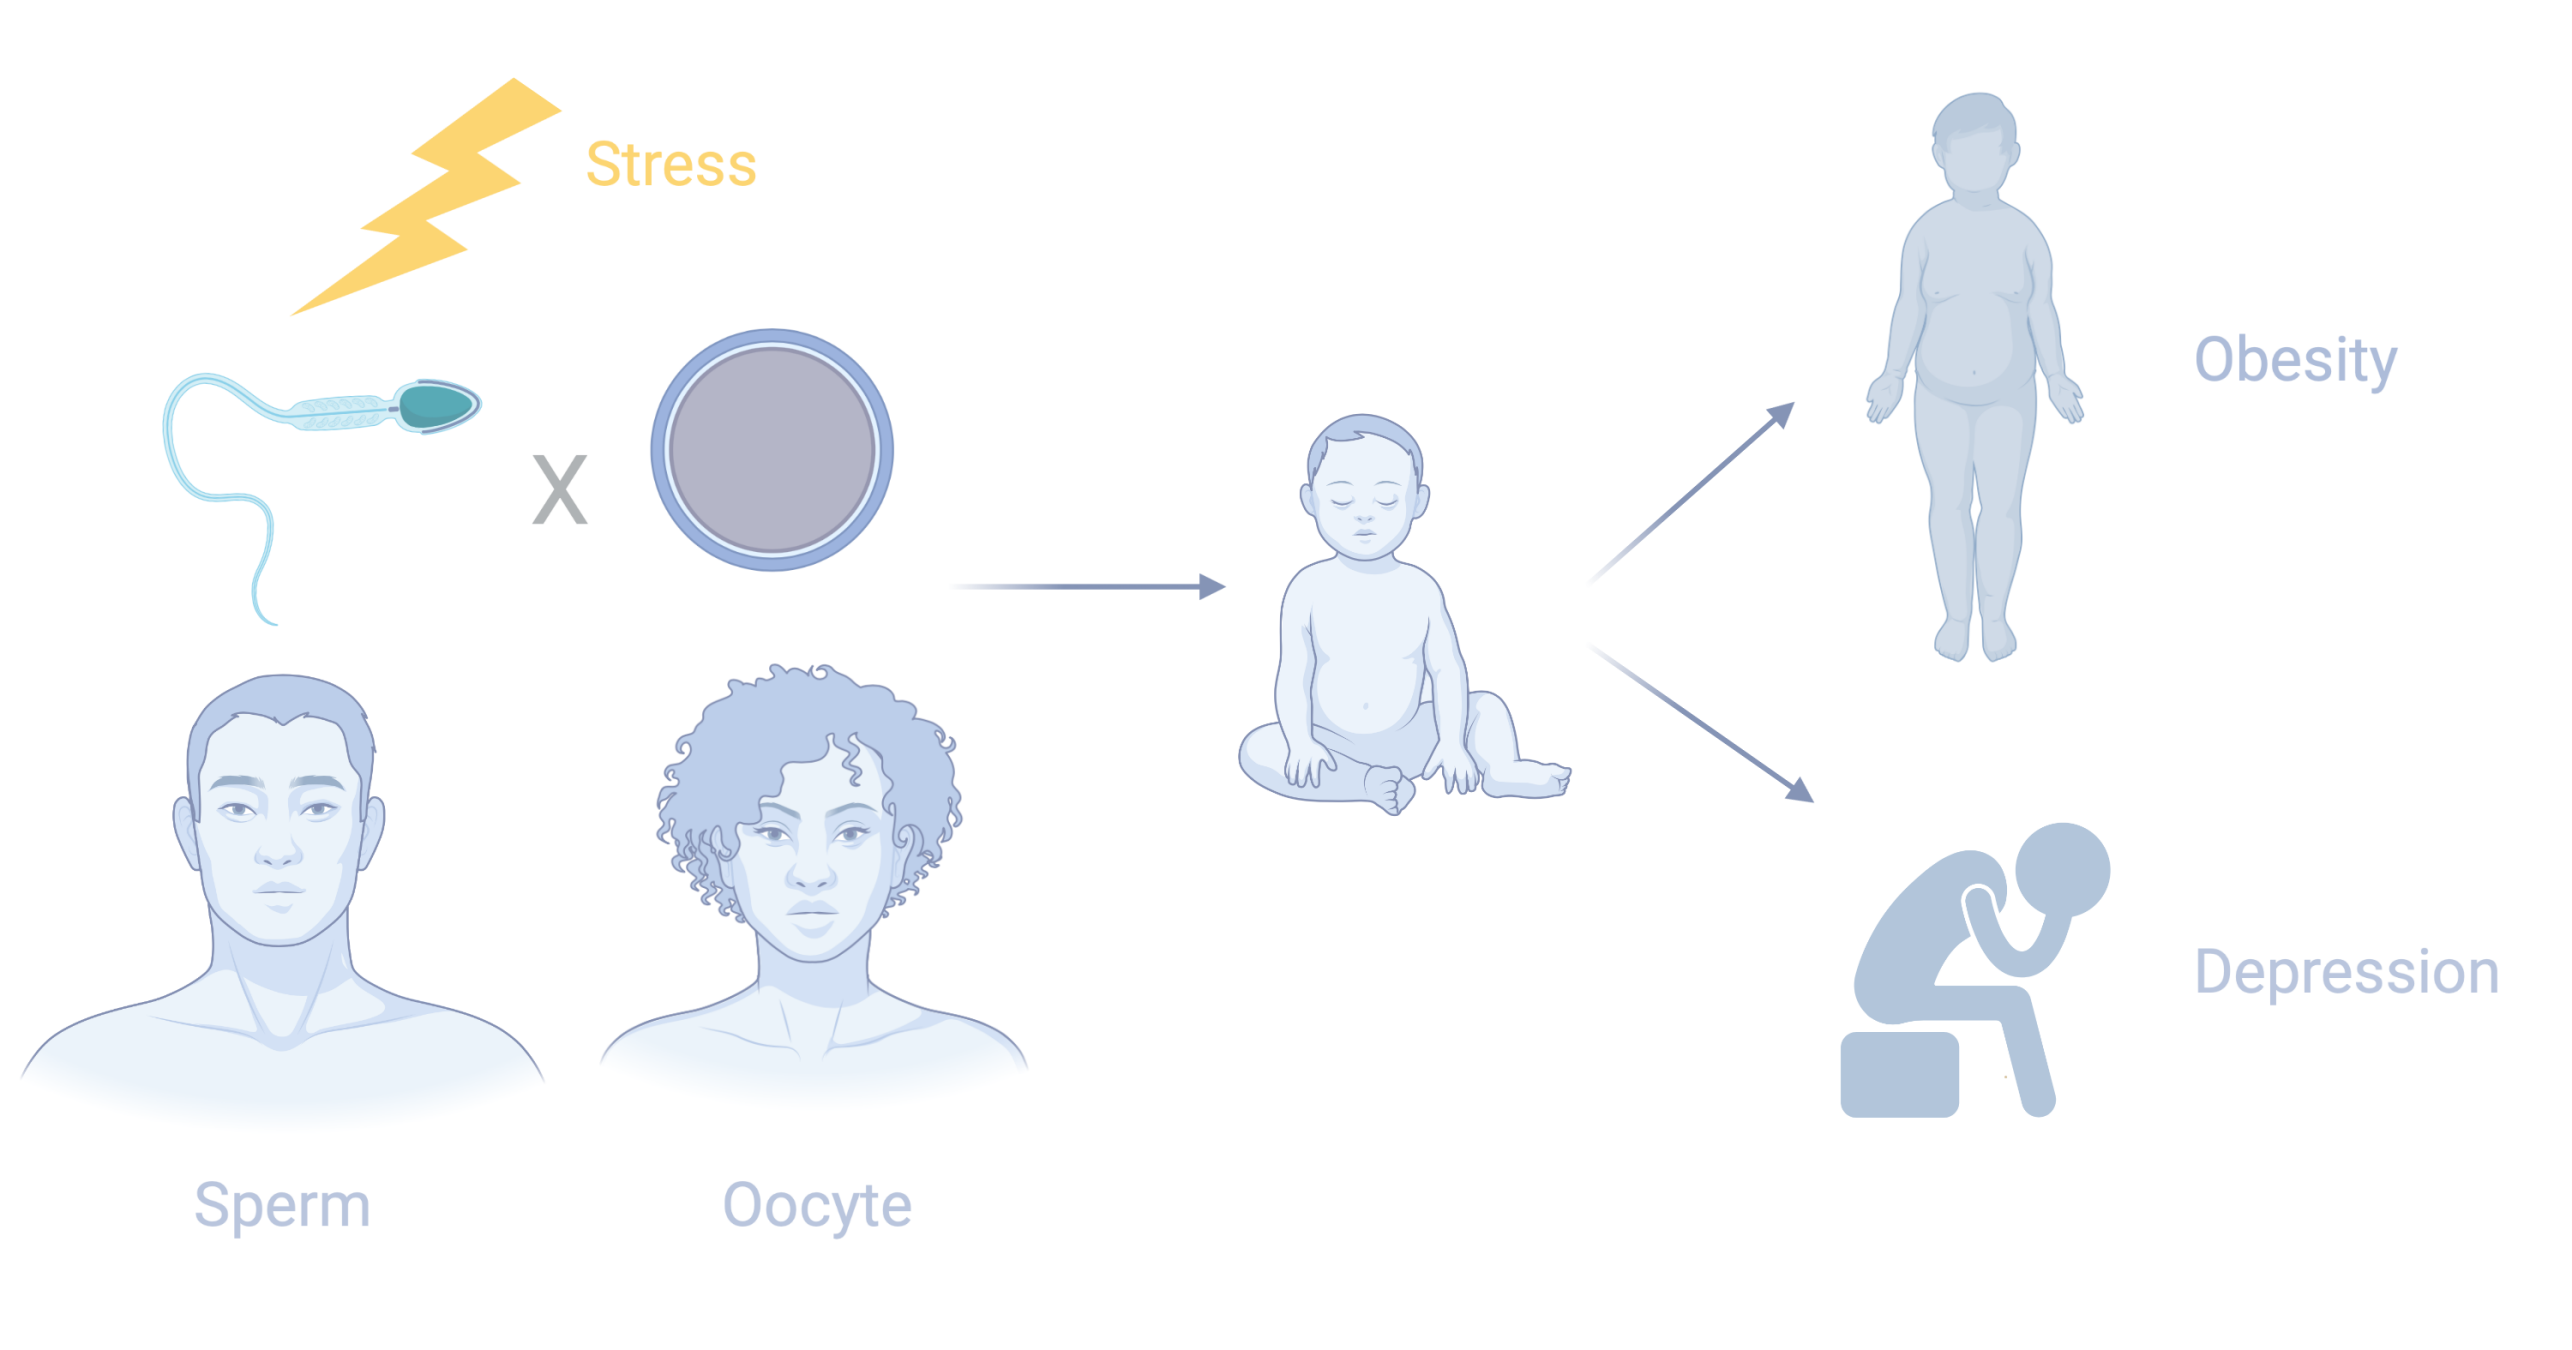 Scheme of germline mediated effects of stress across generations. Made with Biorender